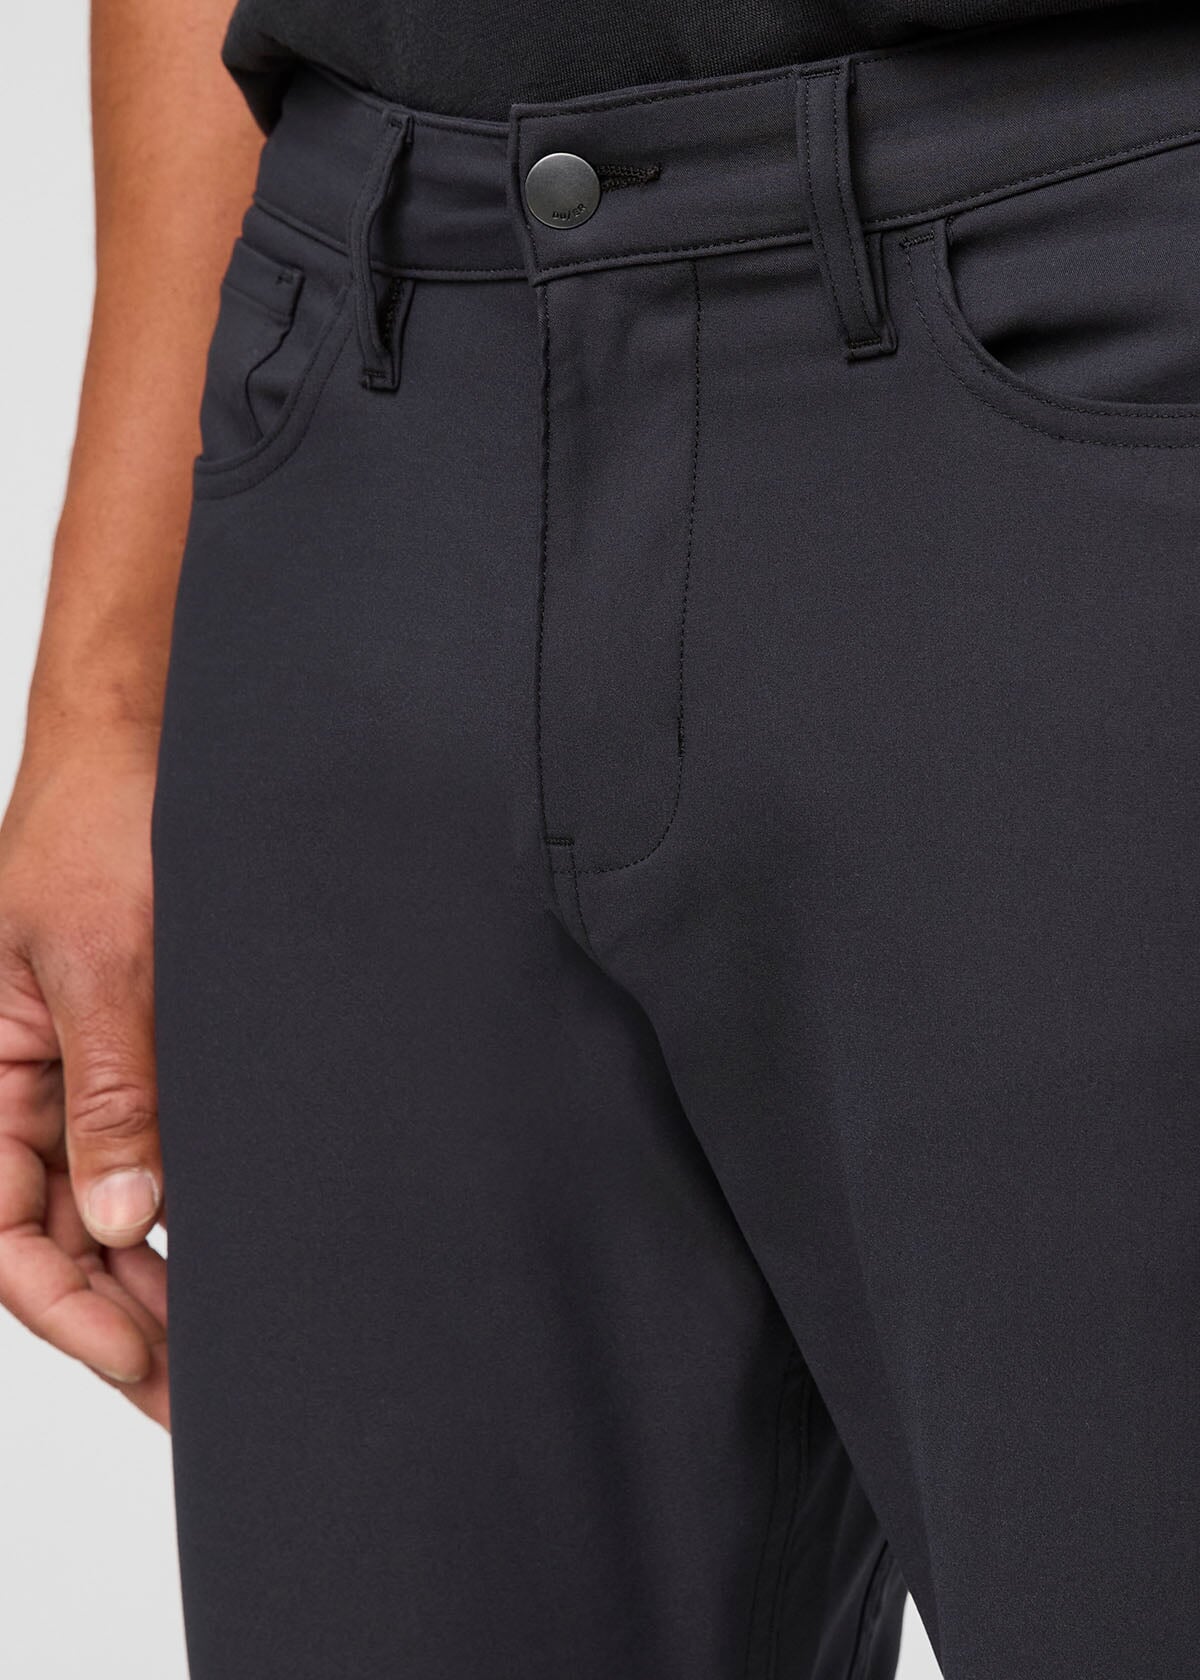 mens black relaxed fit stretch pant front waistband detail